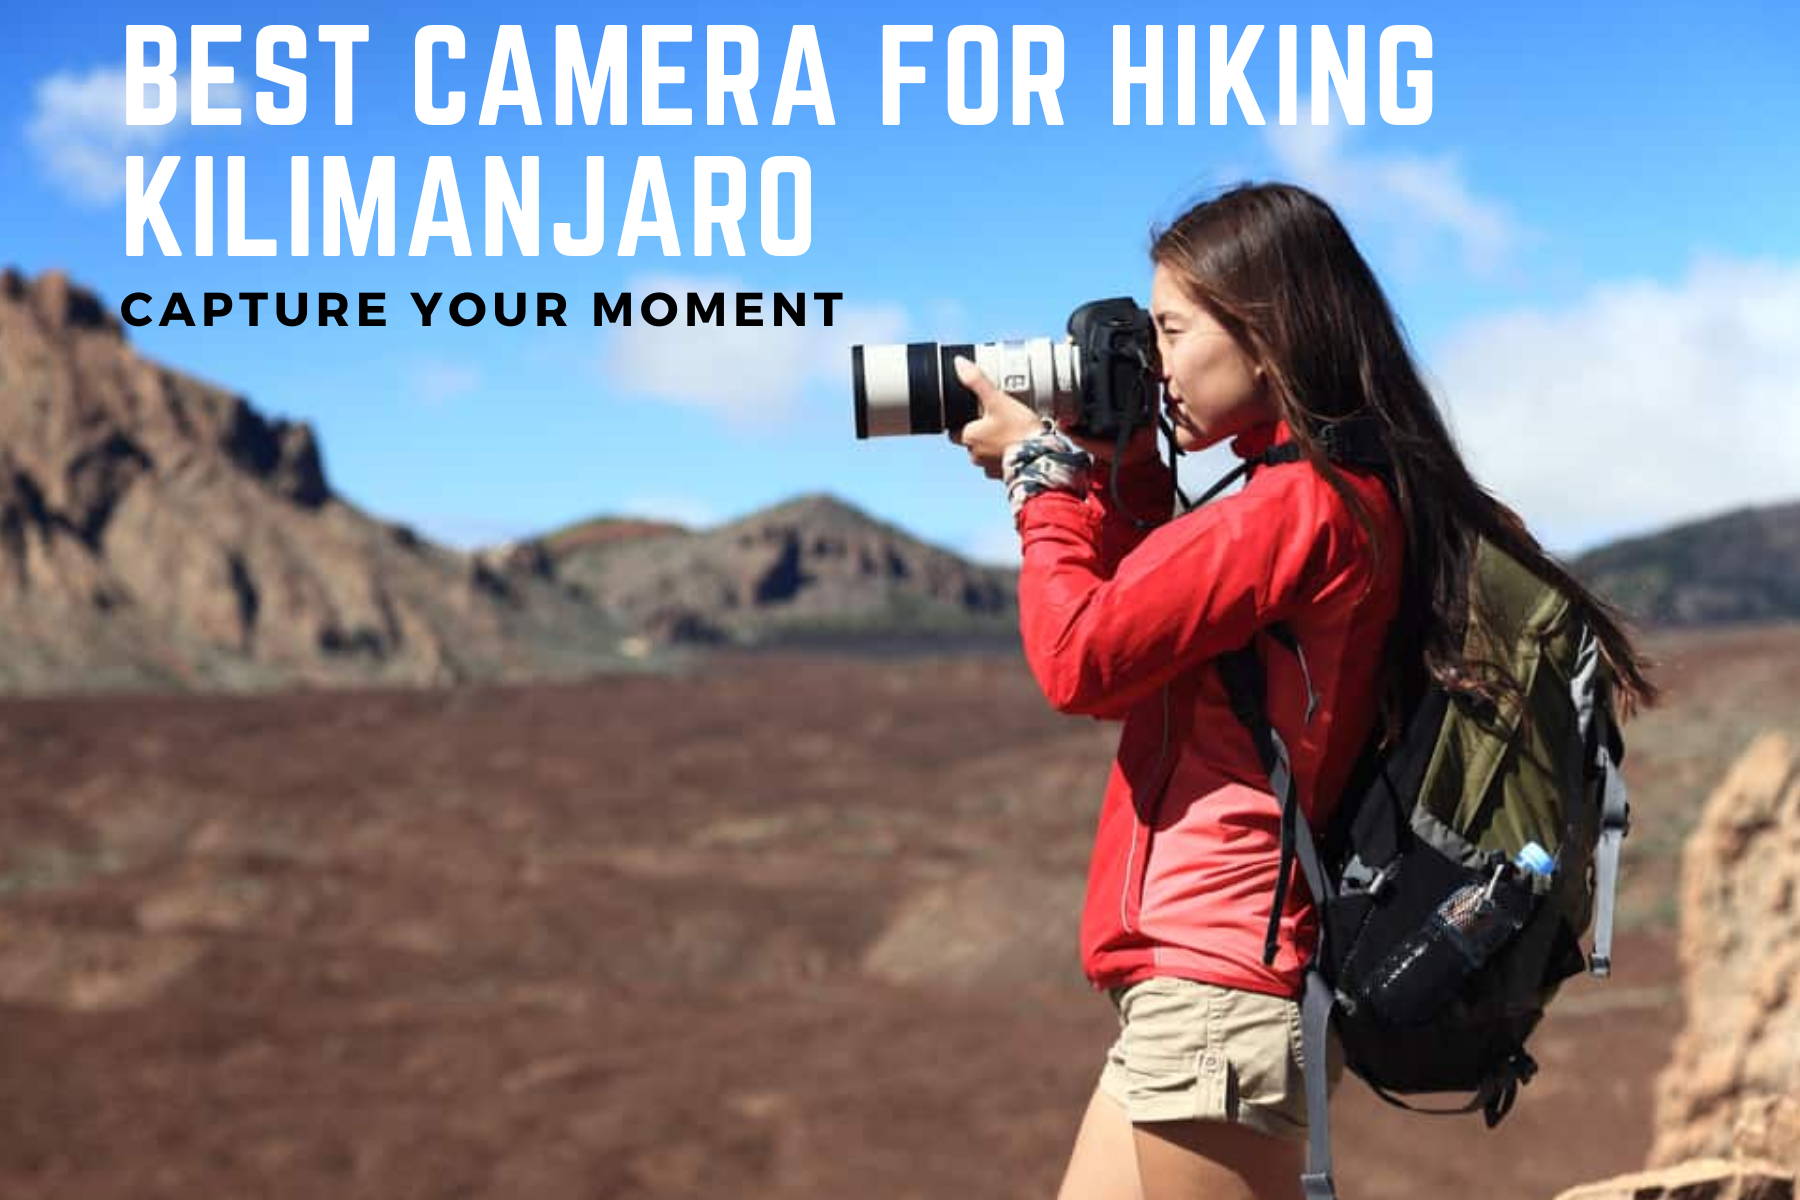 Best Camera For Hiking Kilimanjaro - Capture Your Moment